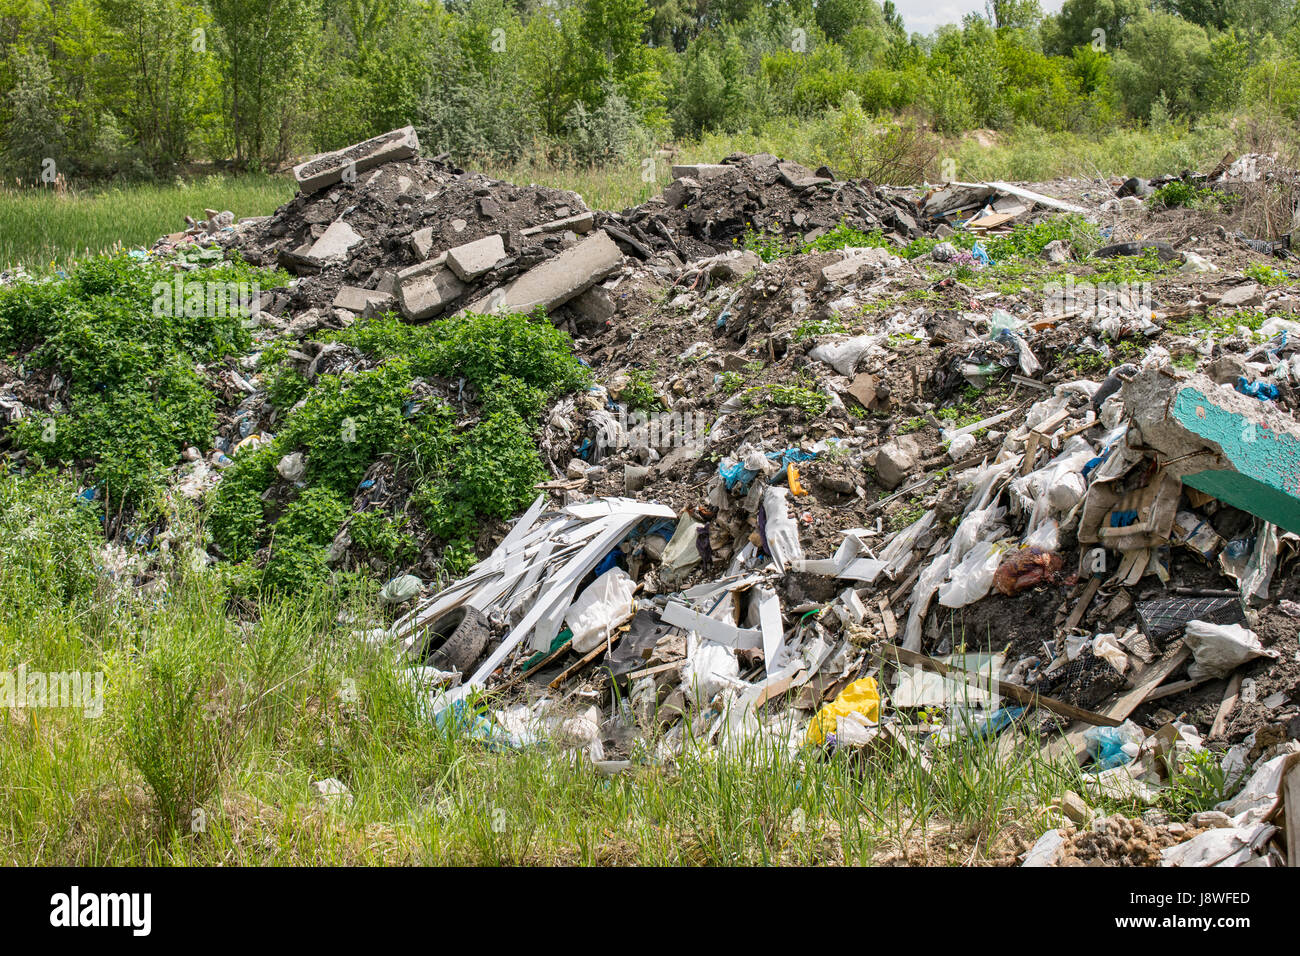 Illegal garbage dumping near the forest in the countryside Stock Photo